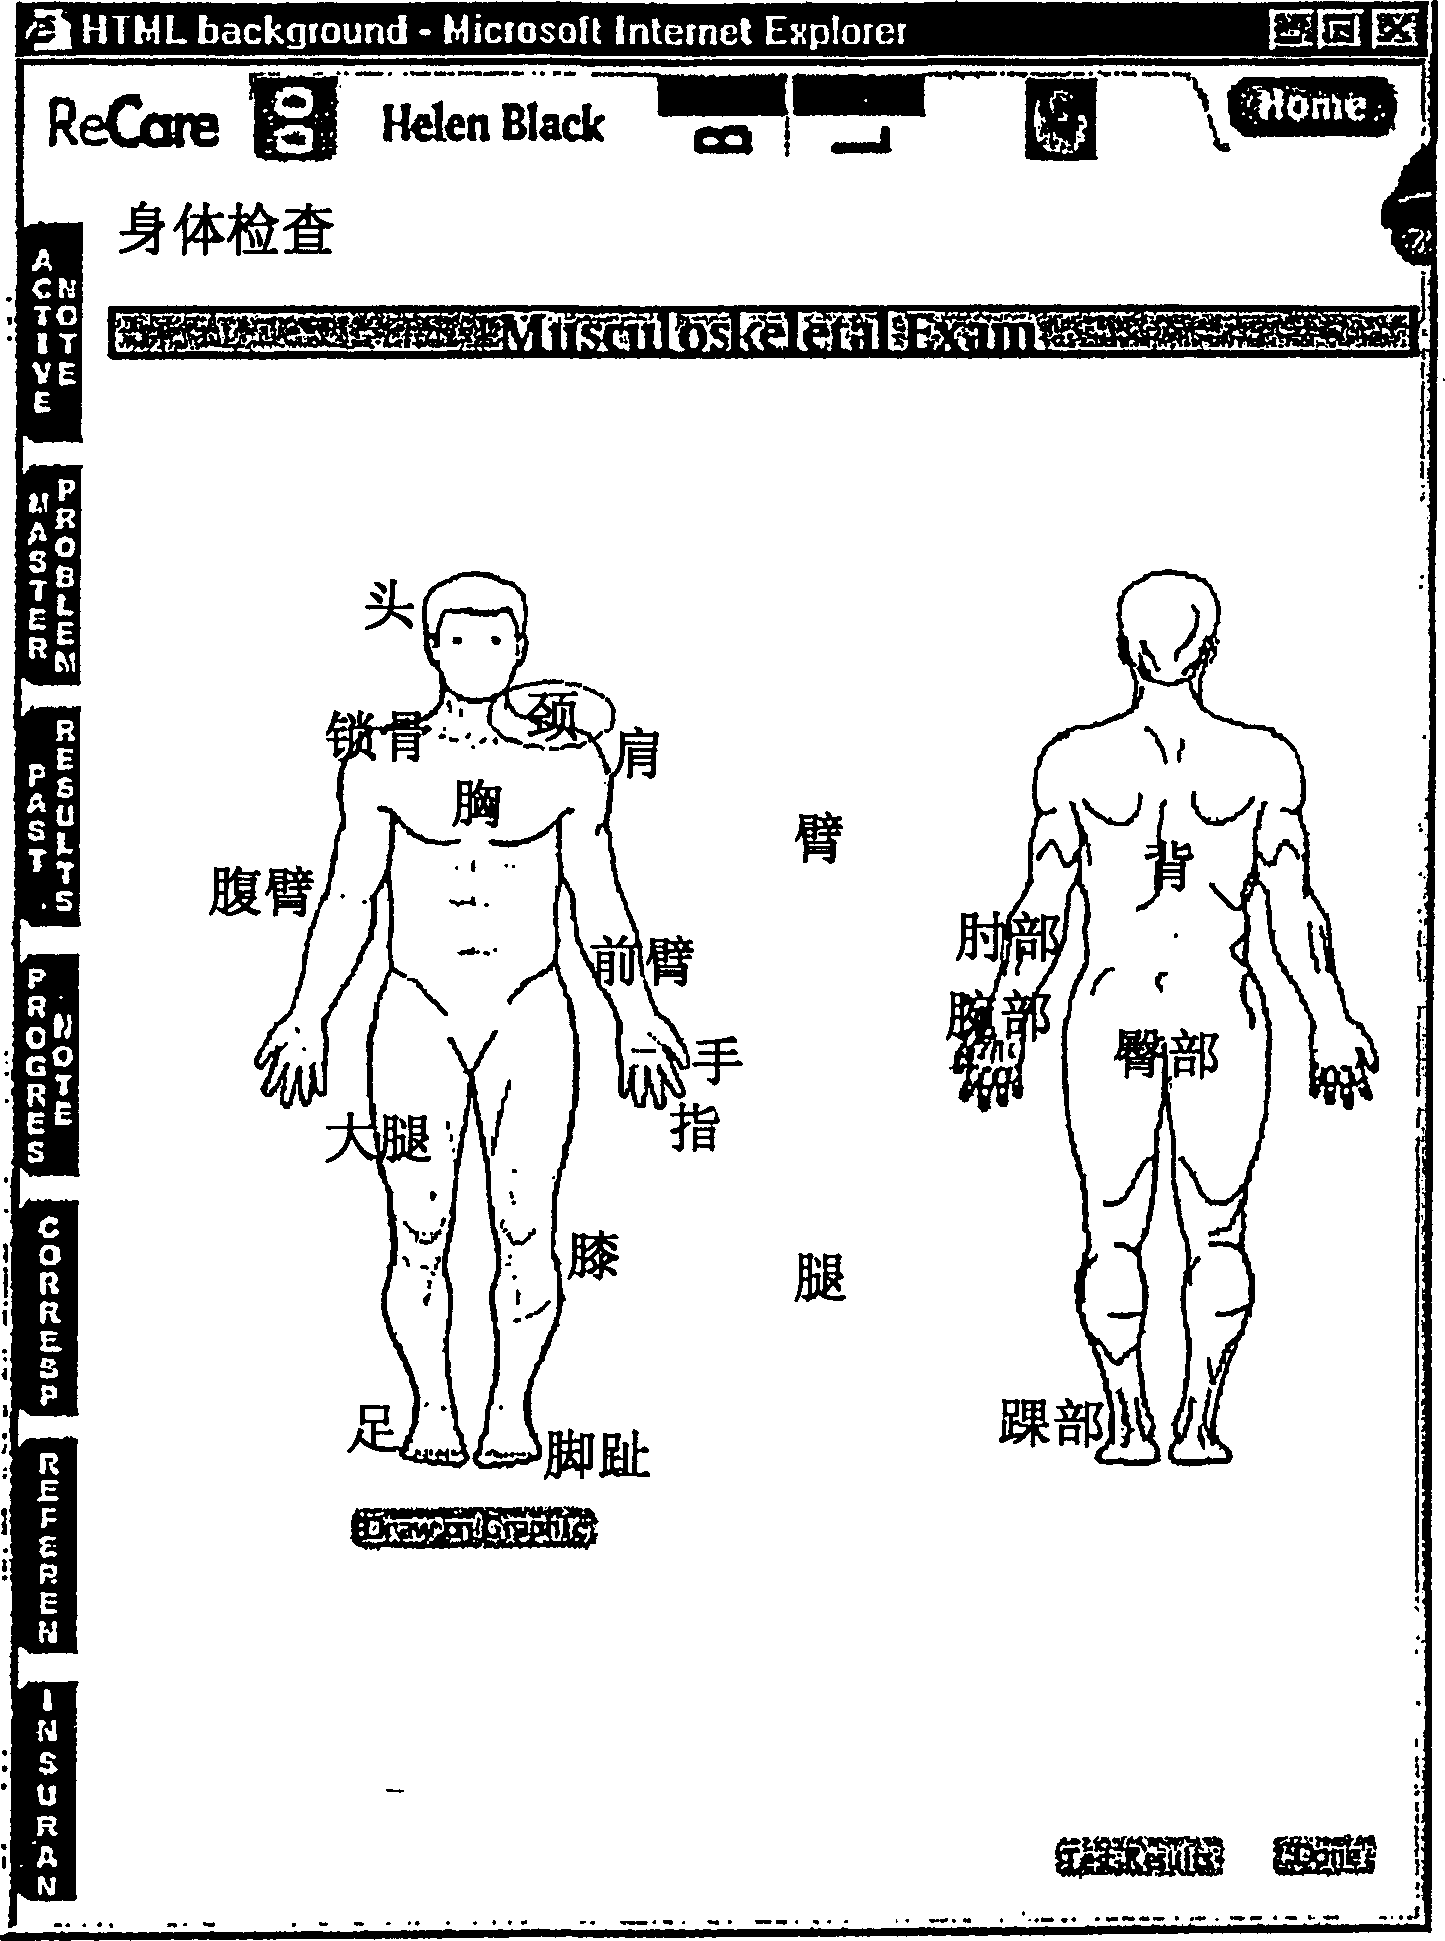 System and methods for documenting medical findings of physical examination